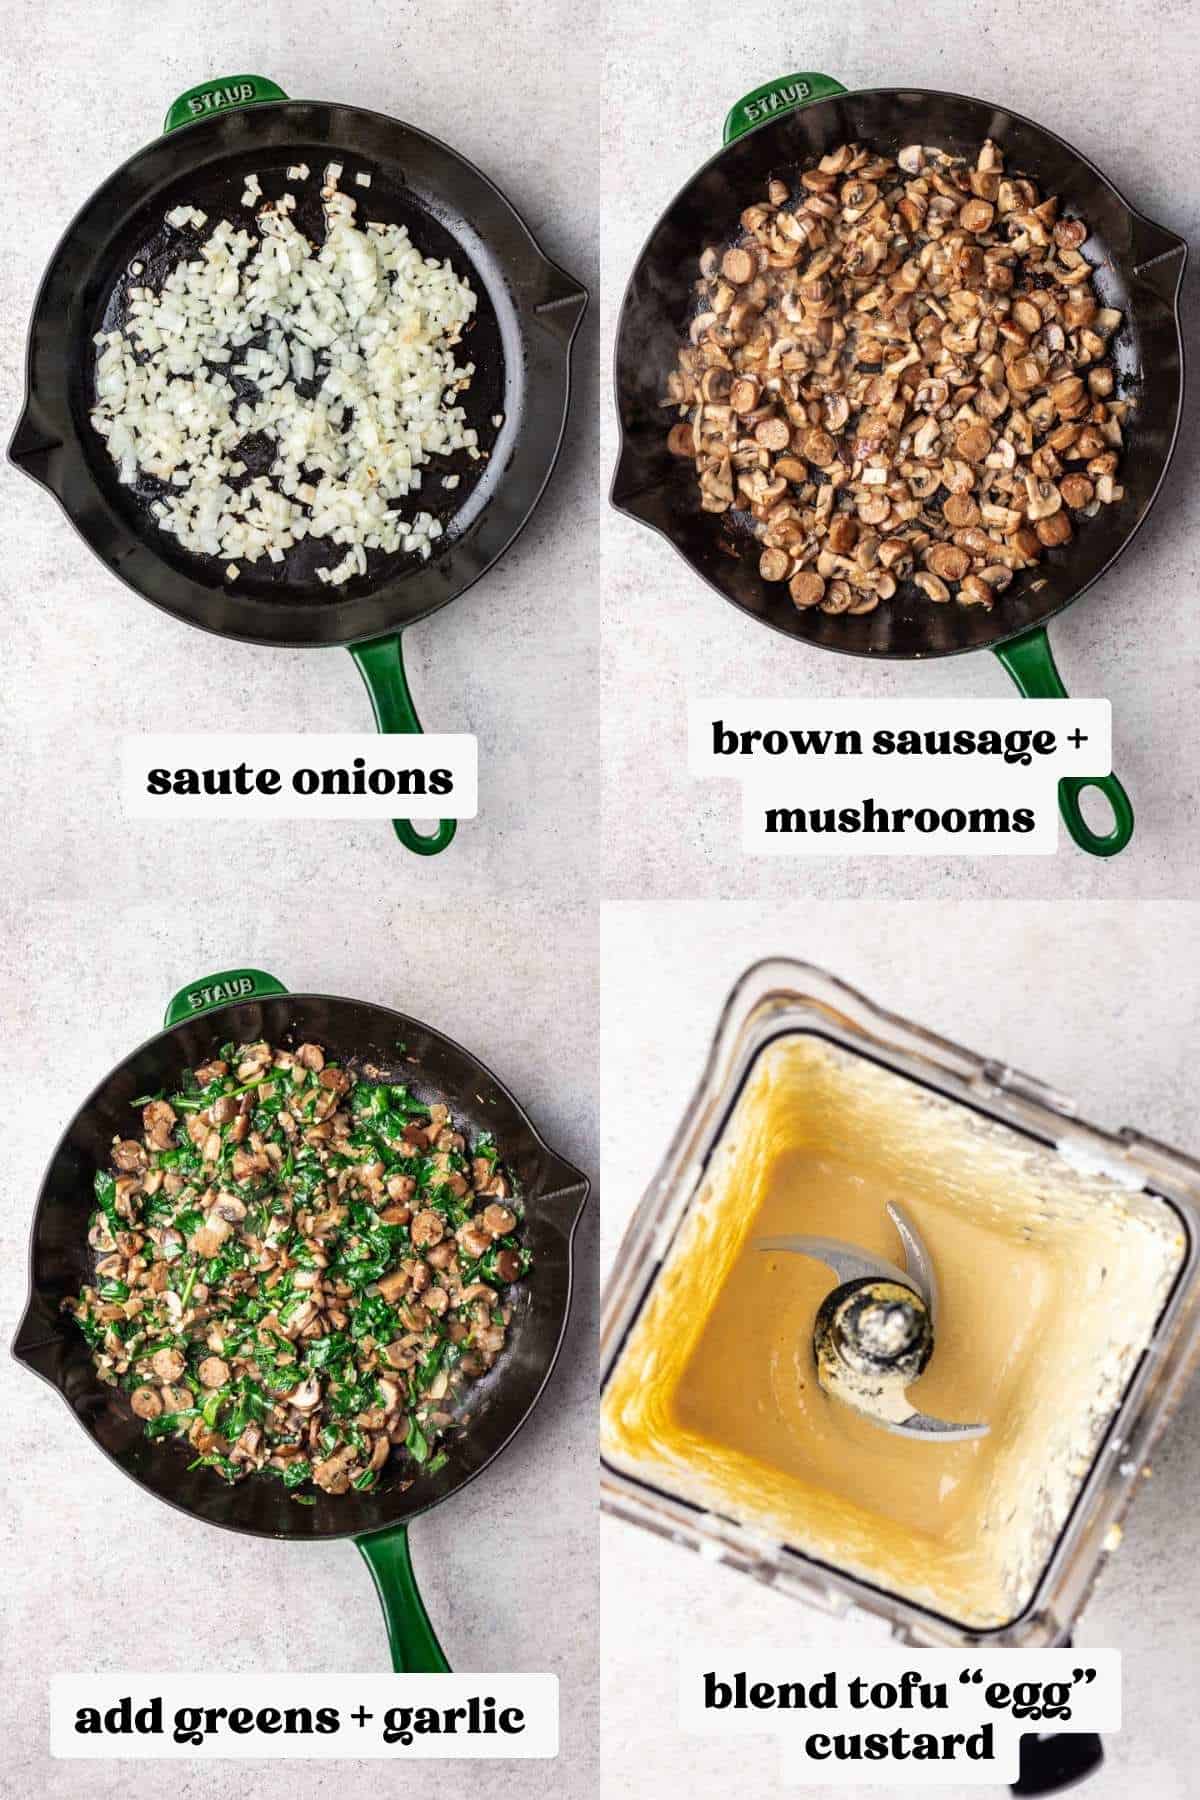 Step by step guide for making tofu quiche.